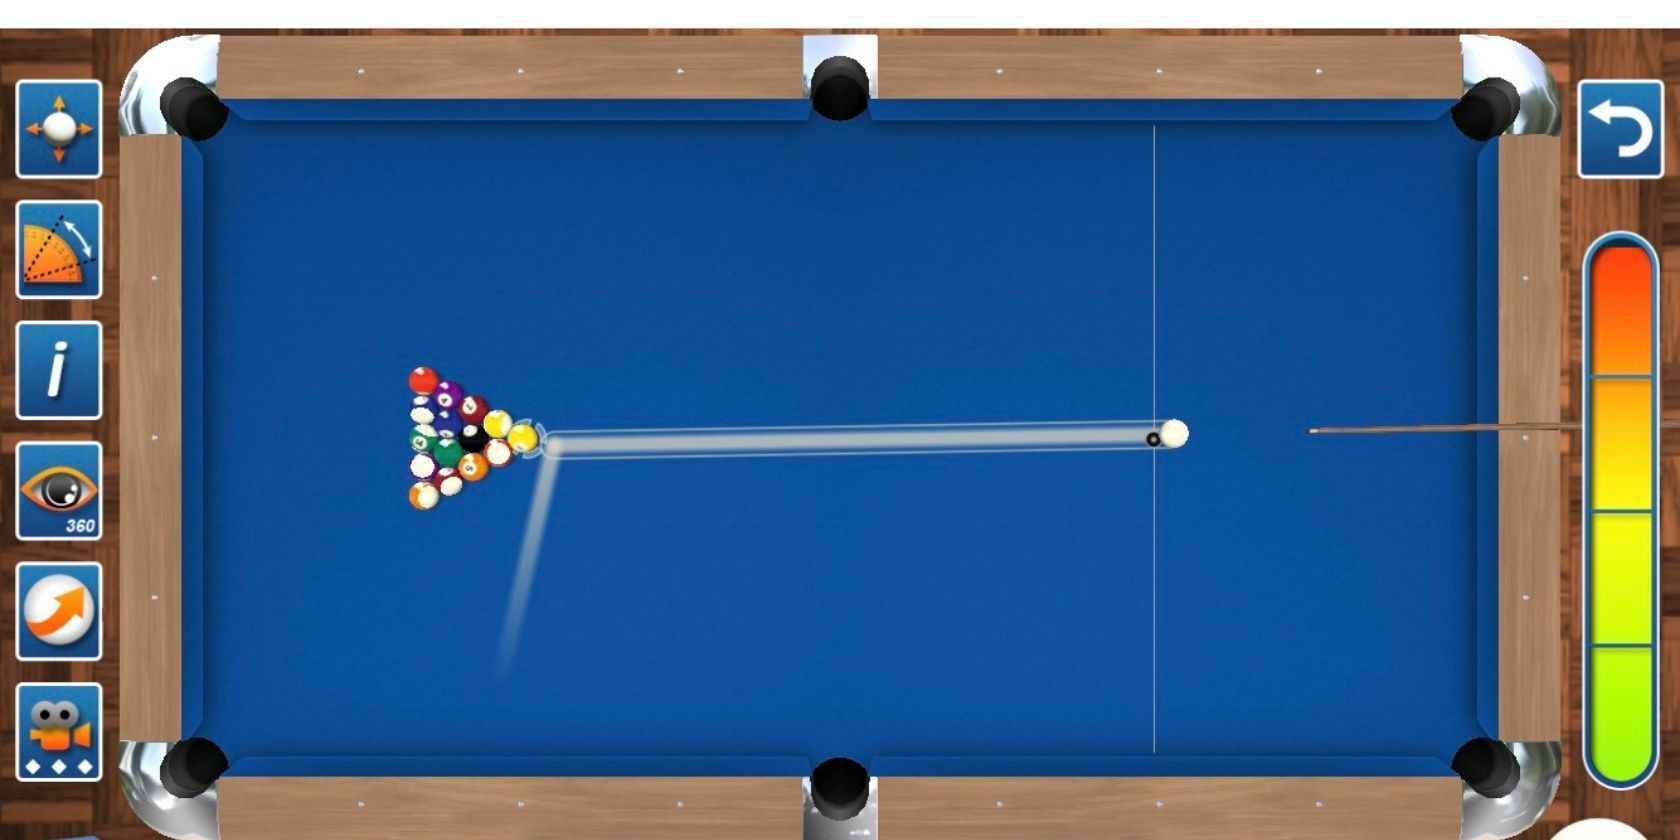 Image of a Practice Game on Pro Pool 2022's iOS app.